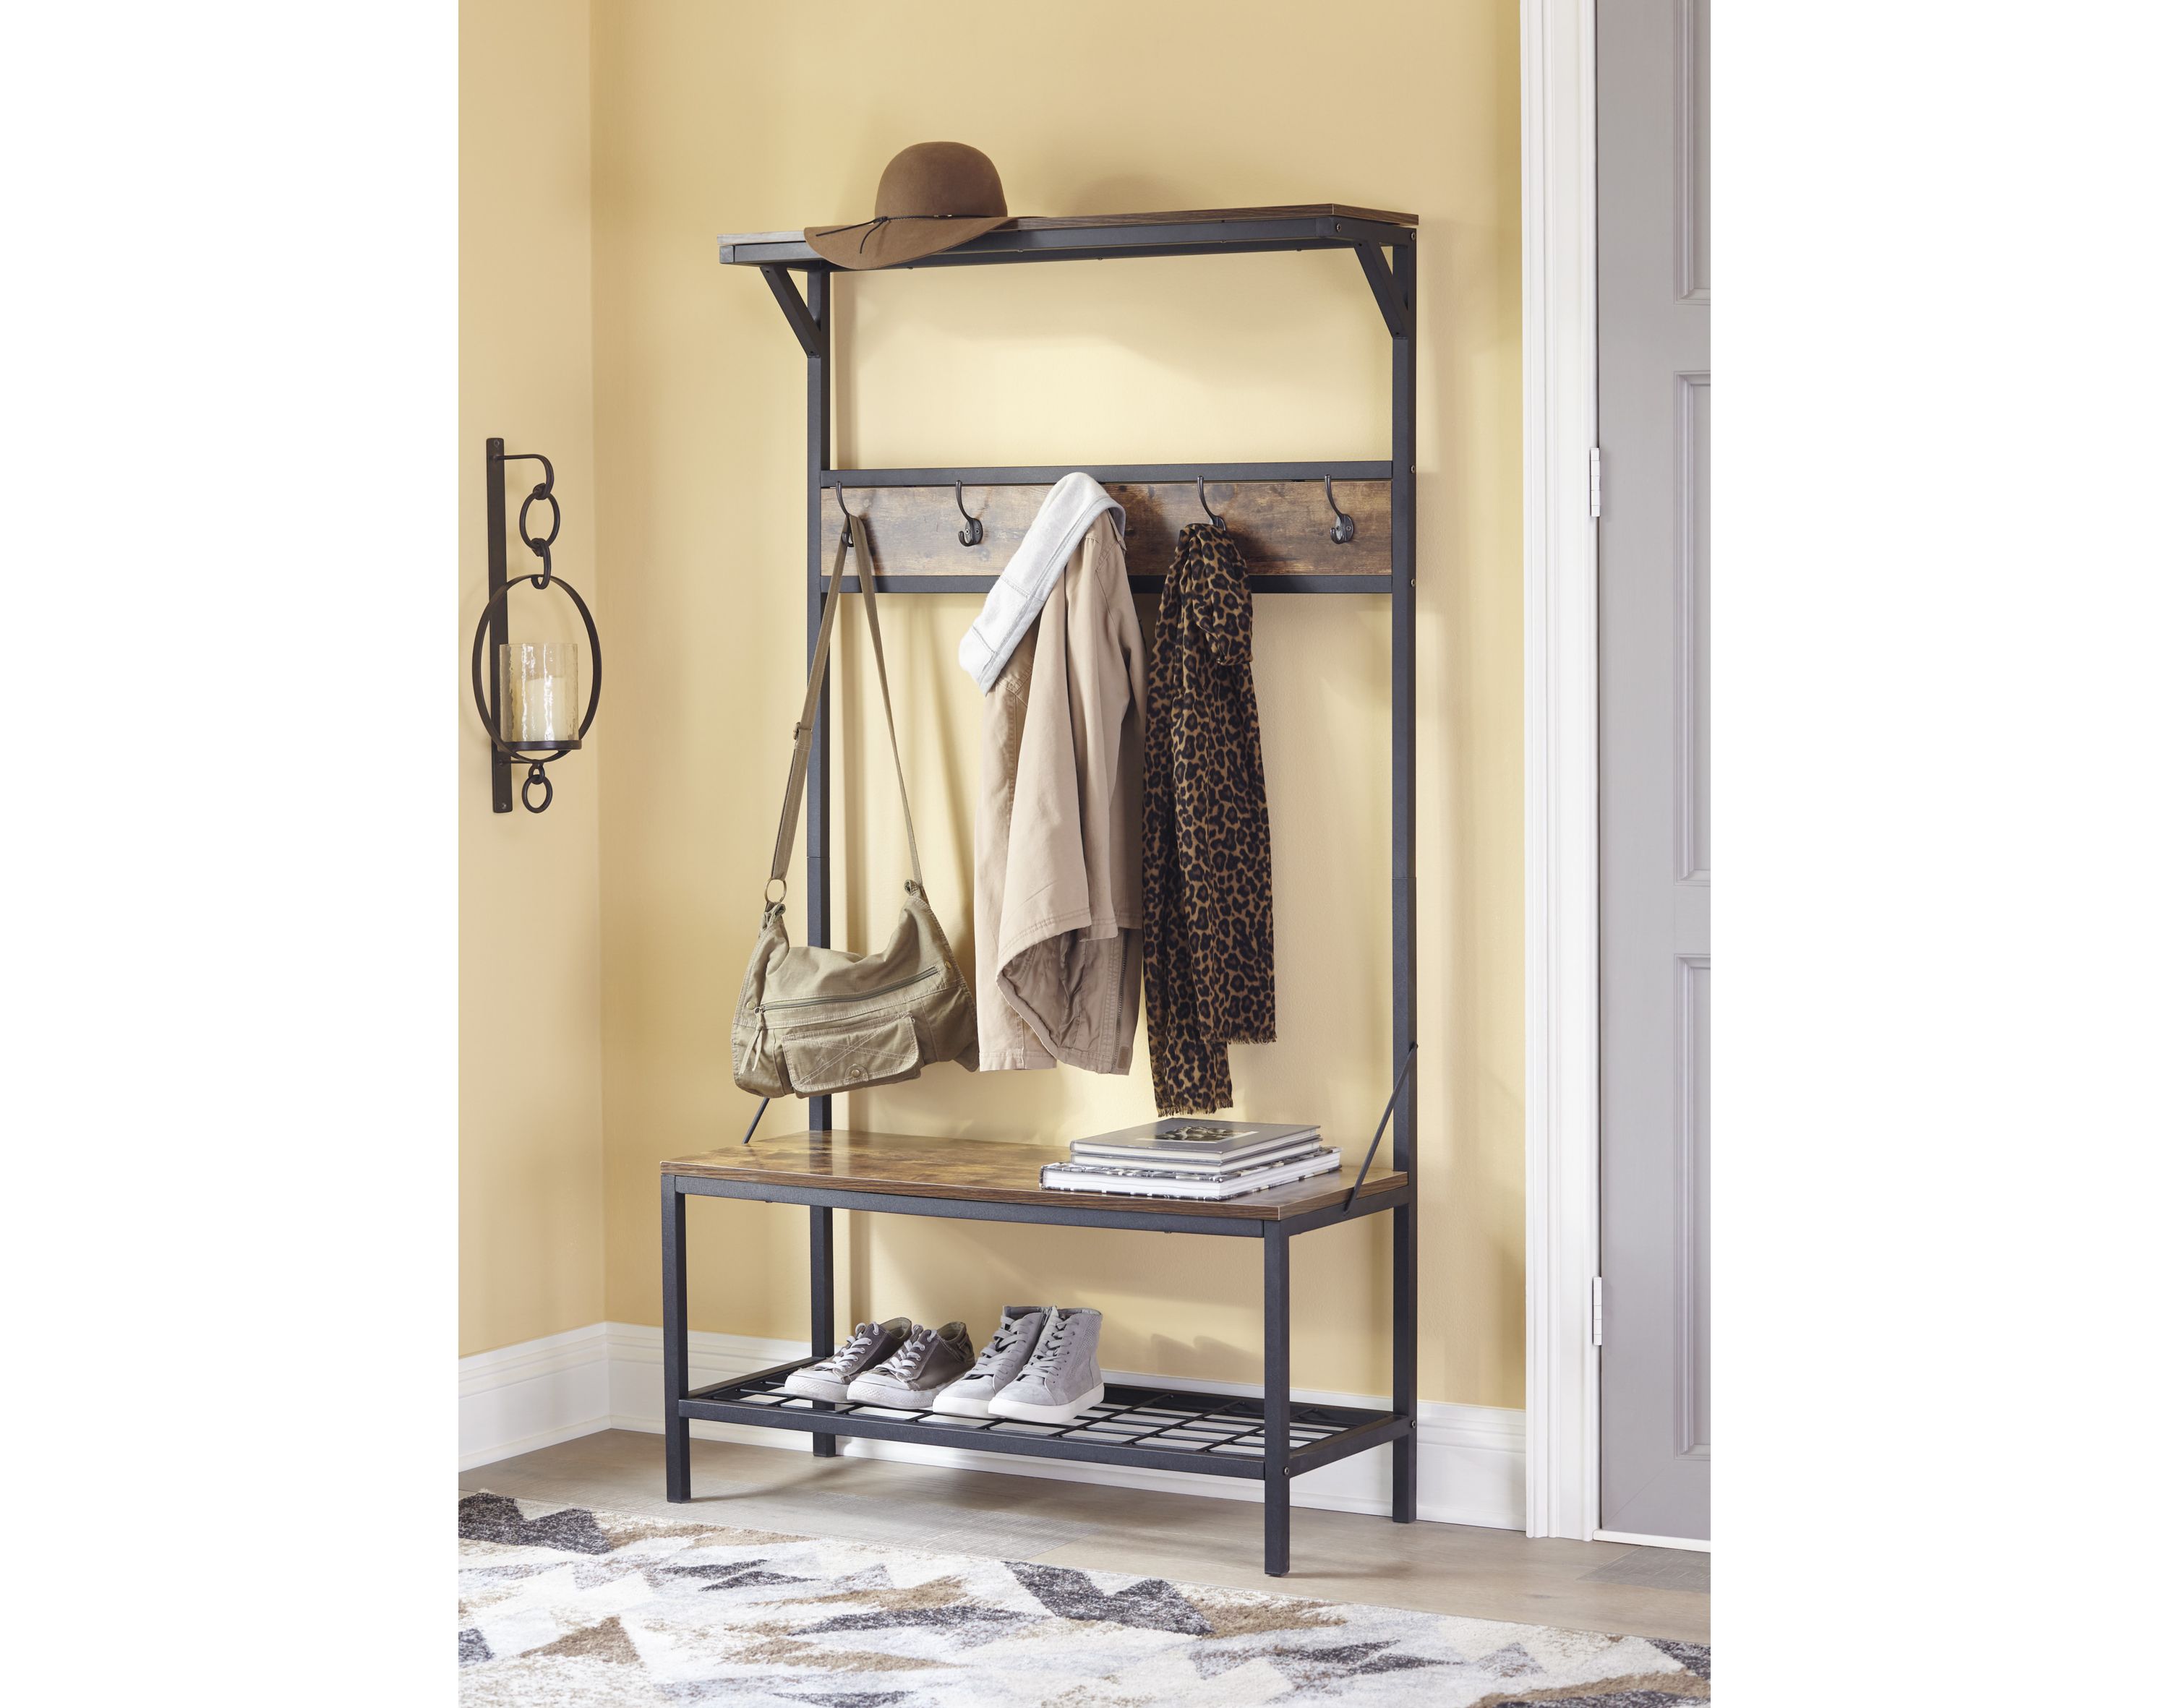 https://www.homemakers.com/shop/home-decor/coat-racks-and-hall-trees/ashley-bevinfield-hall-tree-with-storage-bench/573093.html